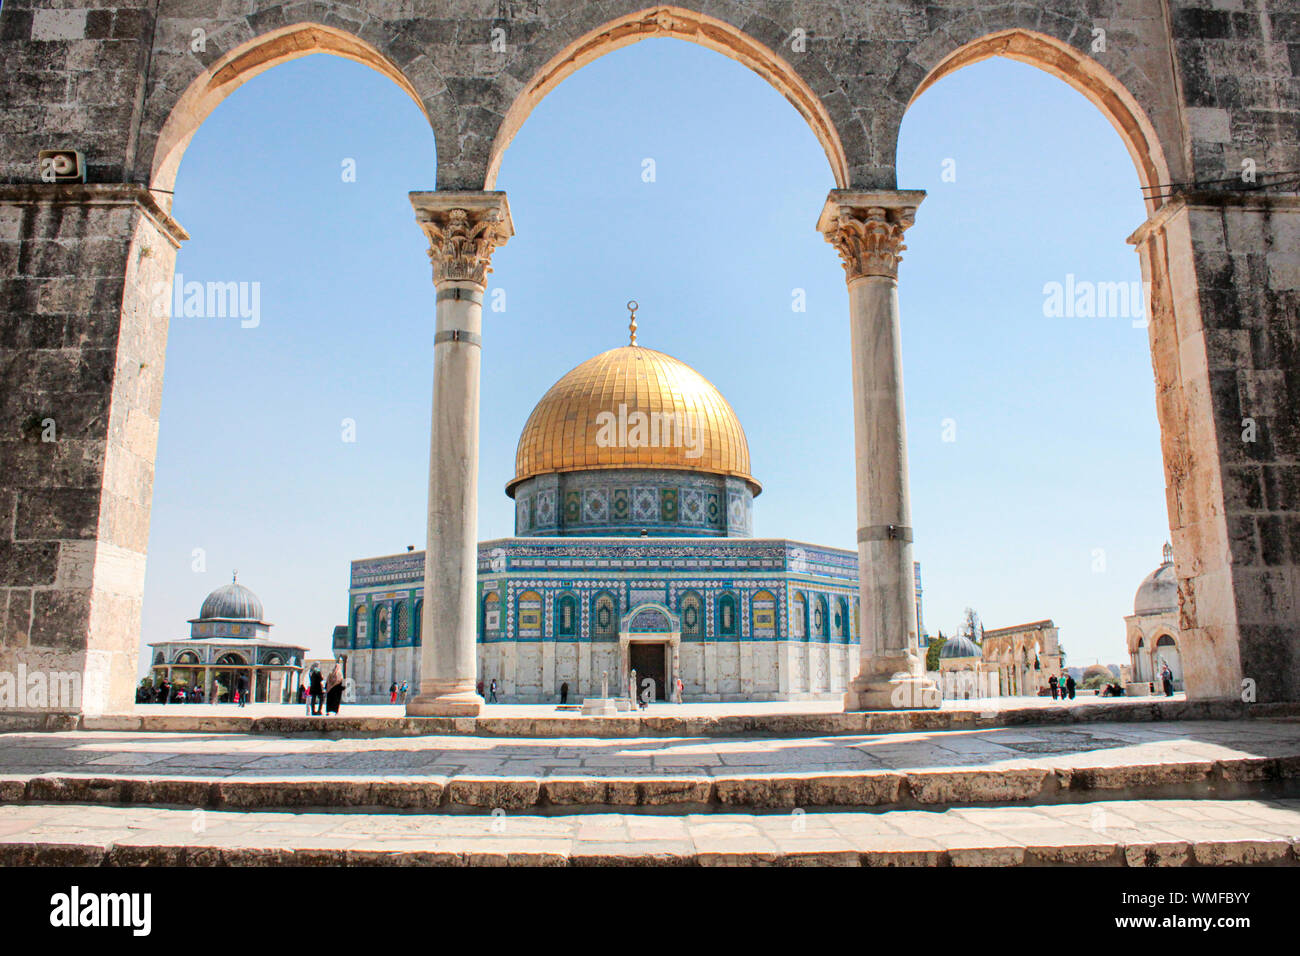 Old Arabic Arches at the Entrance of the Dome of the Rock - Jerusalem, Israel Stock Photo